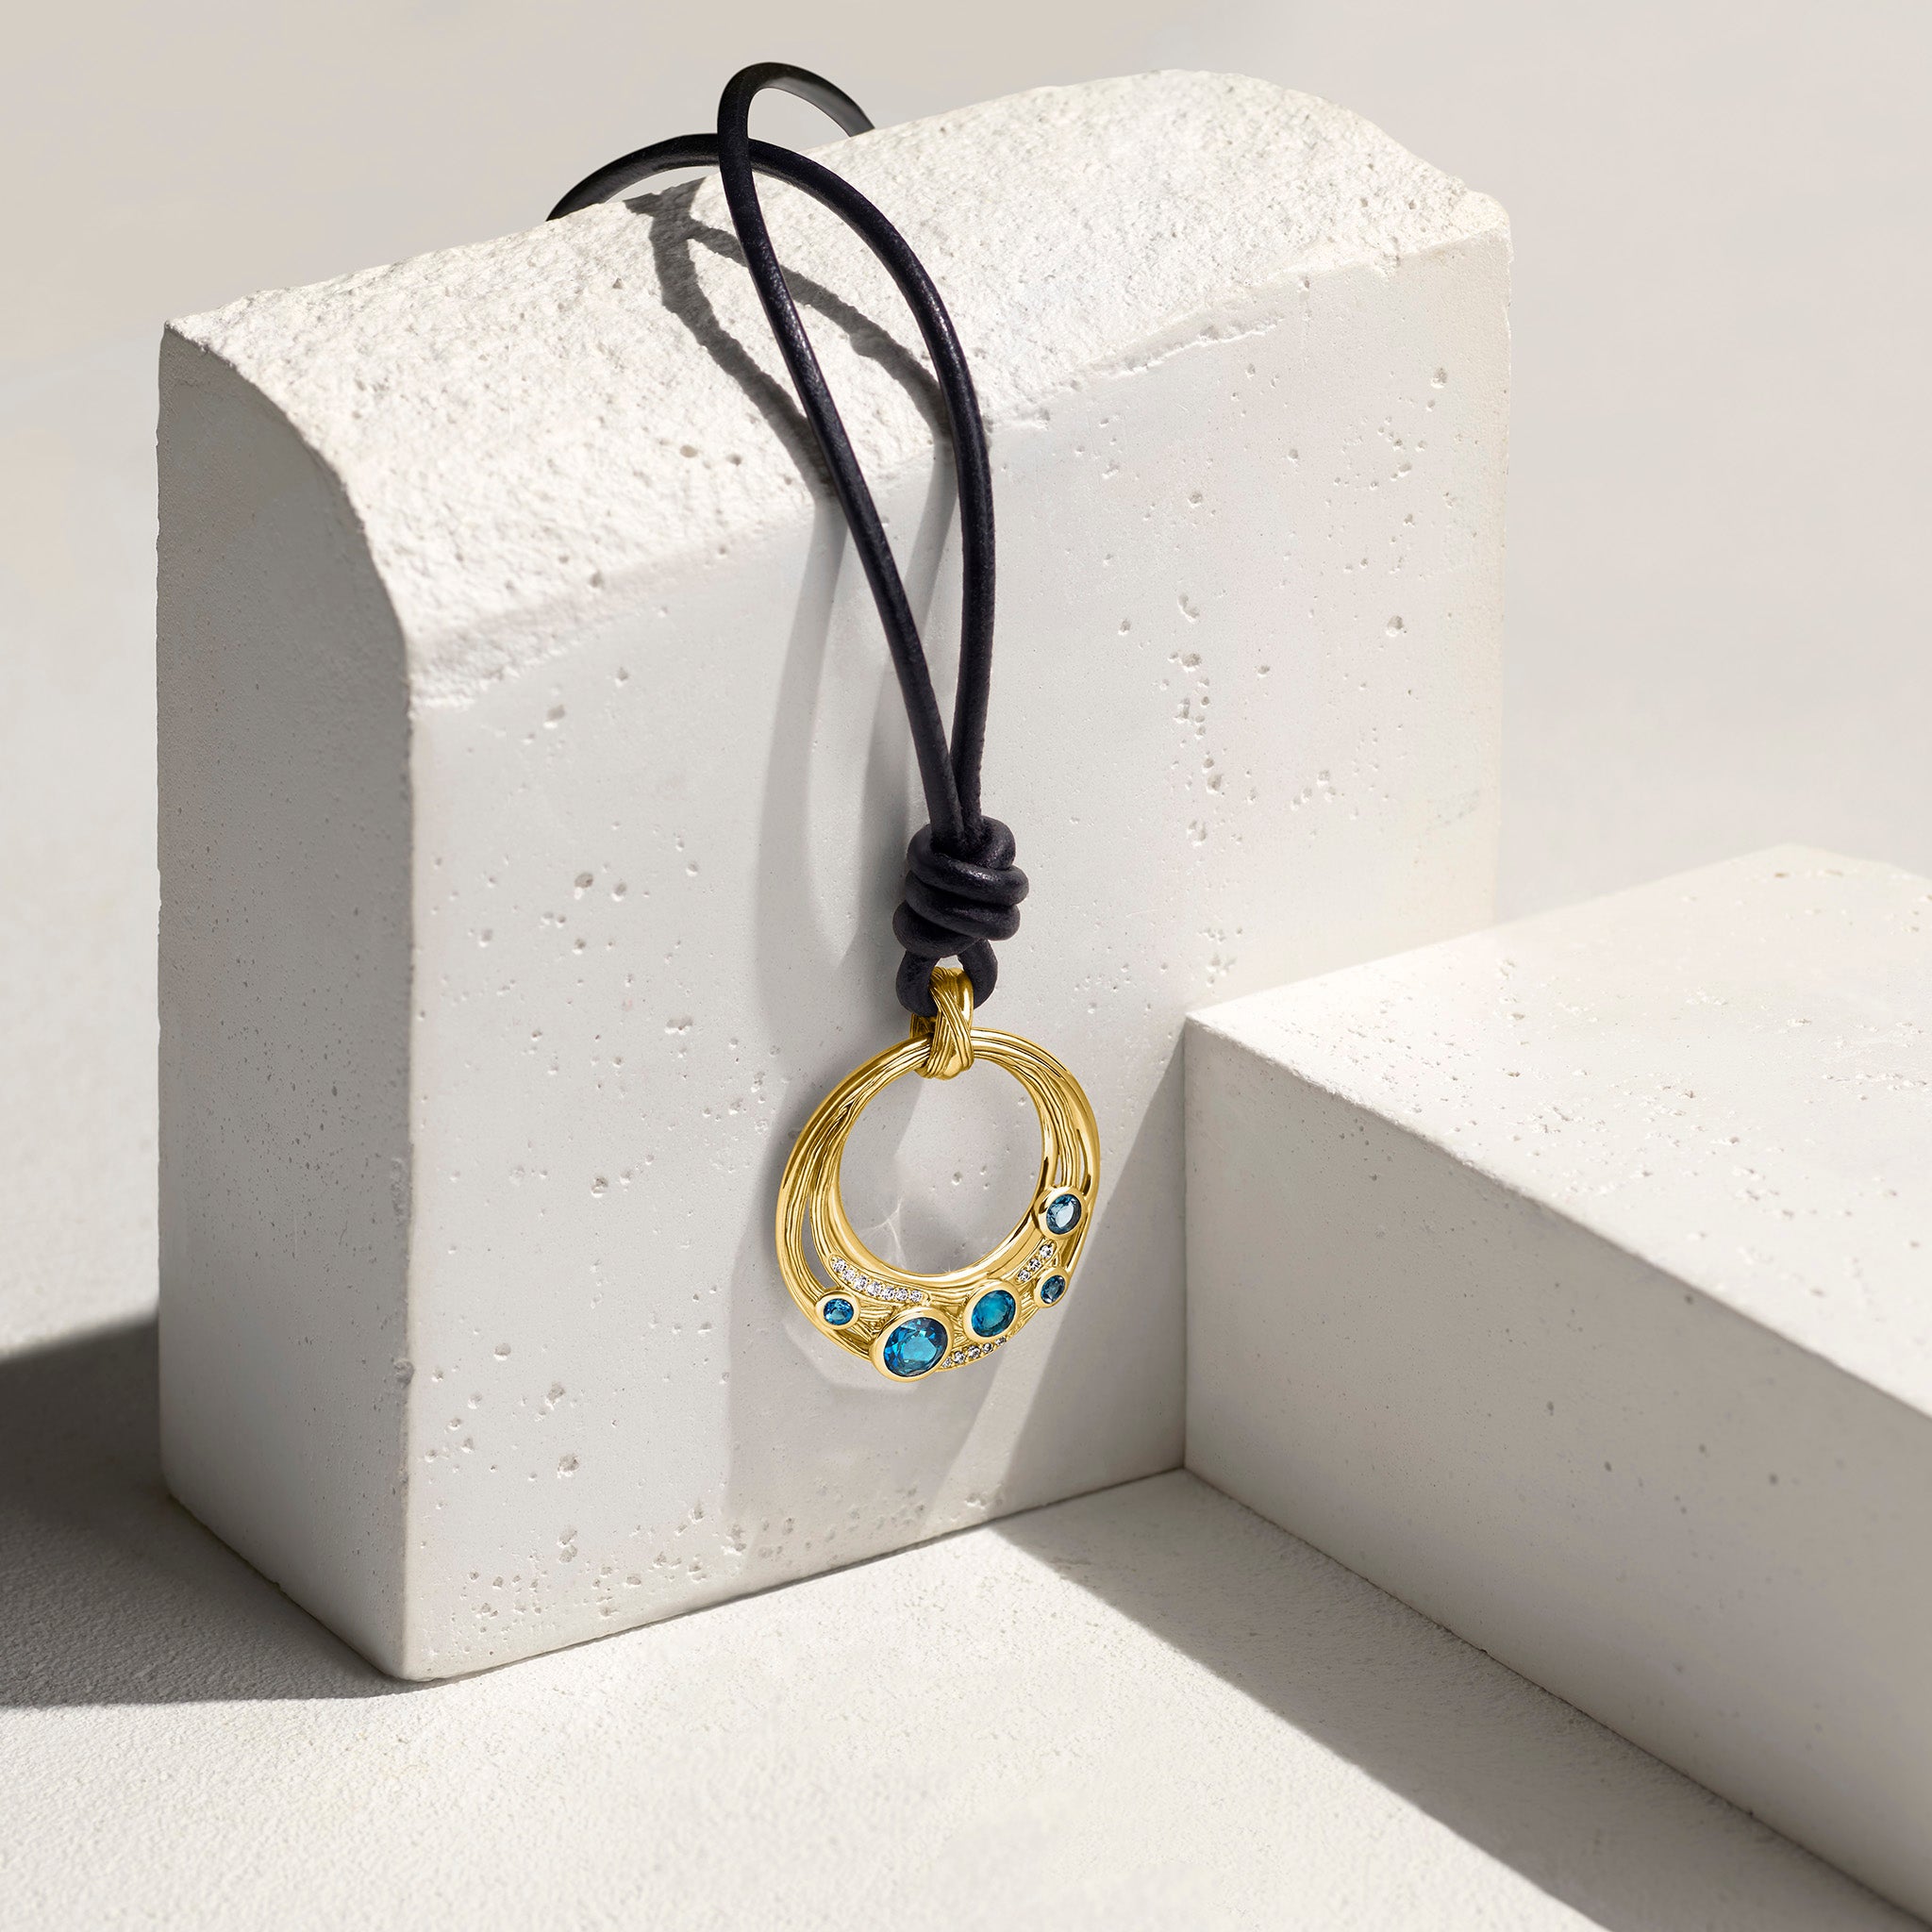 Santorini Long Leather Cord Necklace with London Blue Topaz and Diamonds in 18K